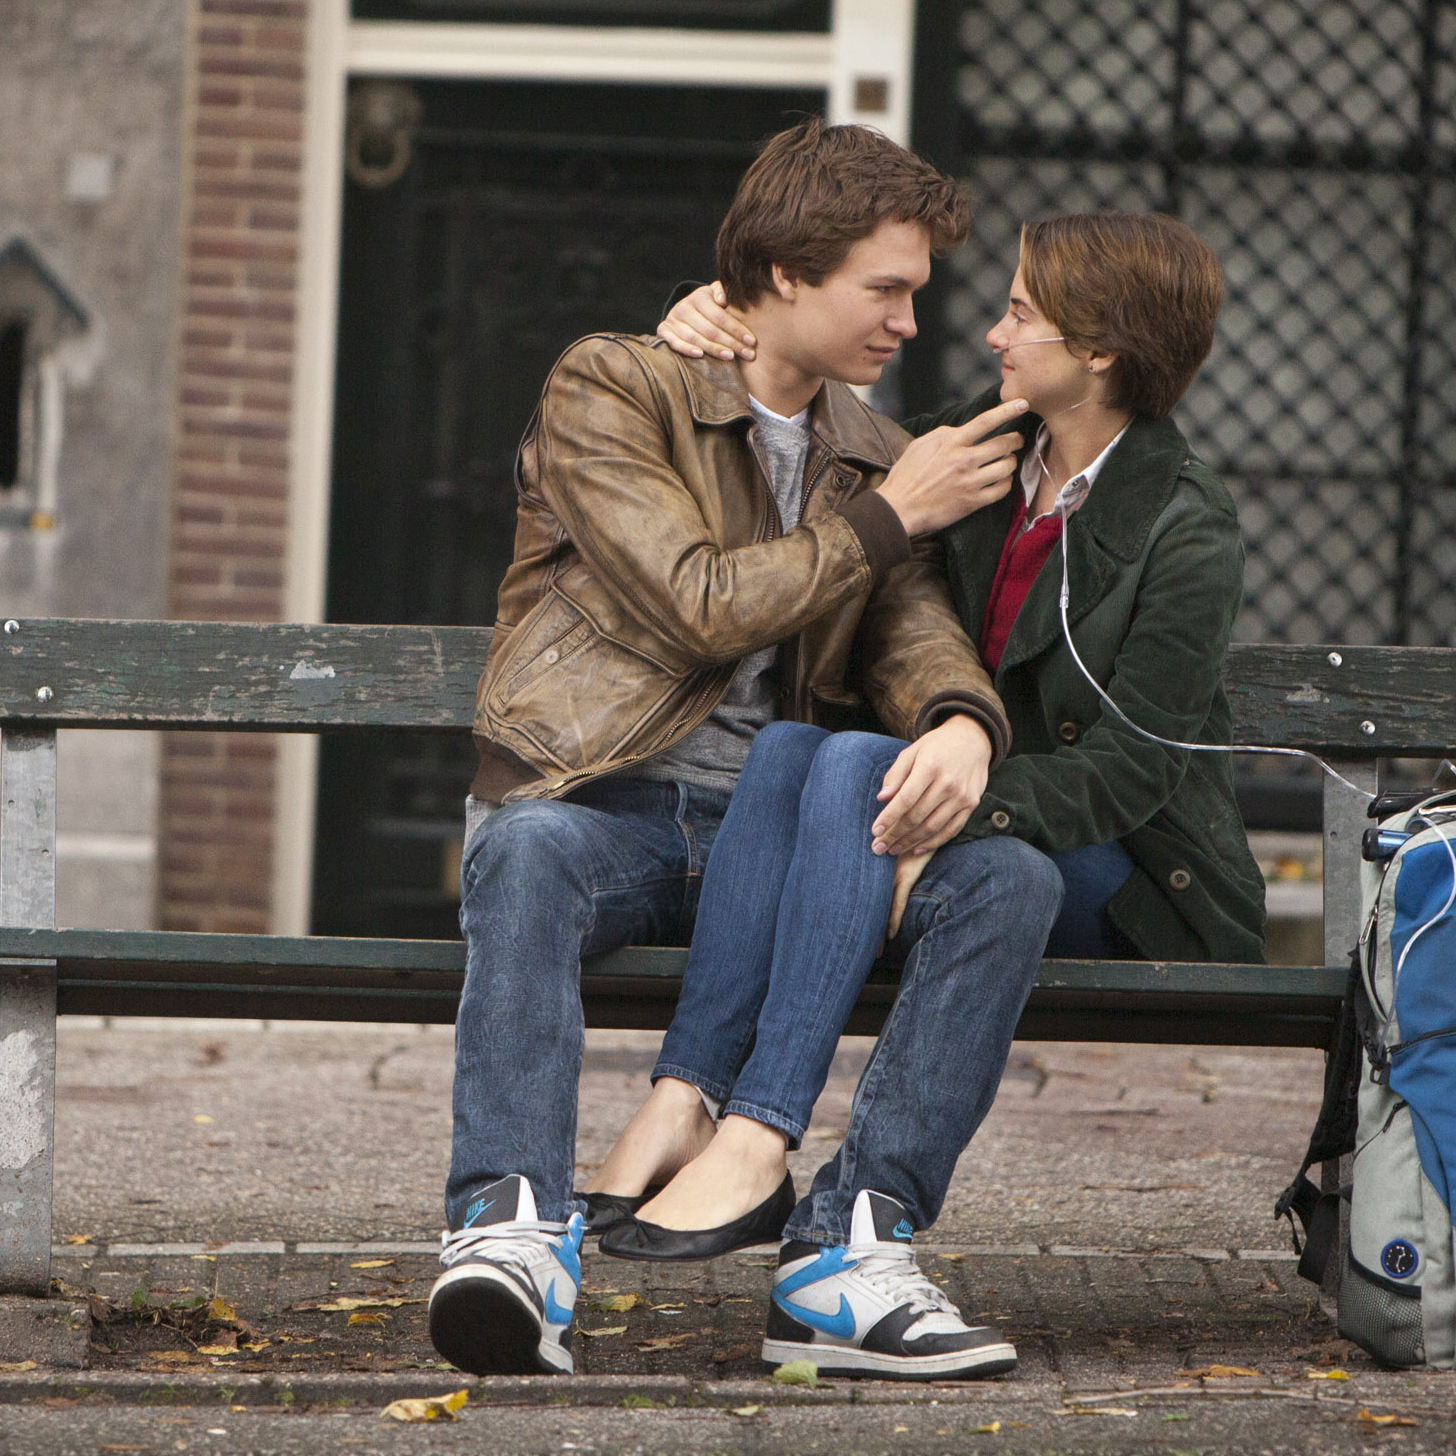 the fault in our stars movie review